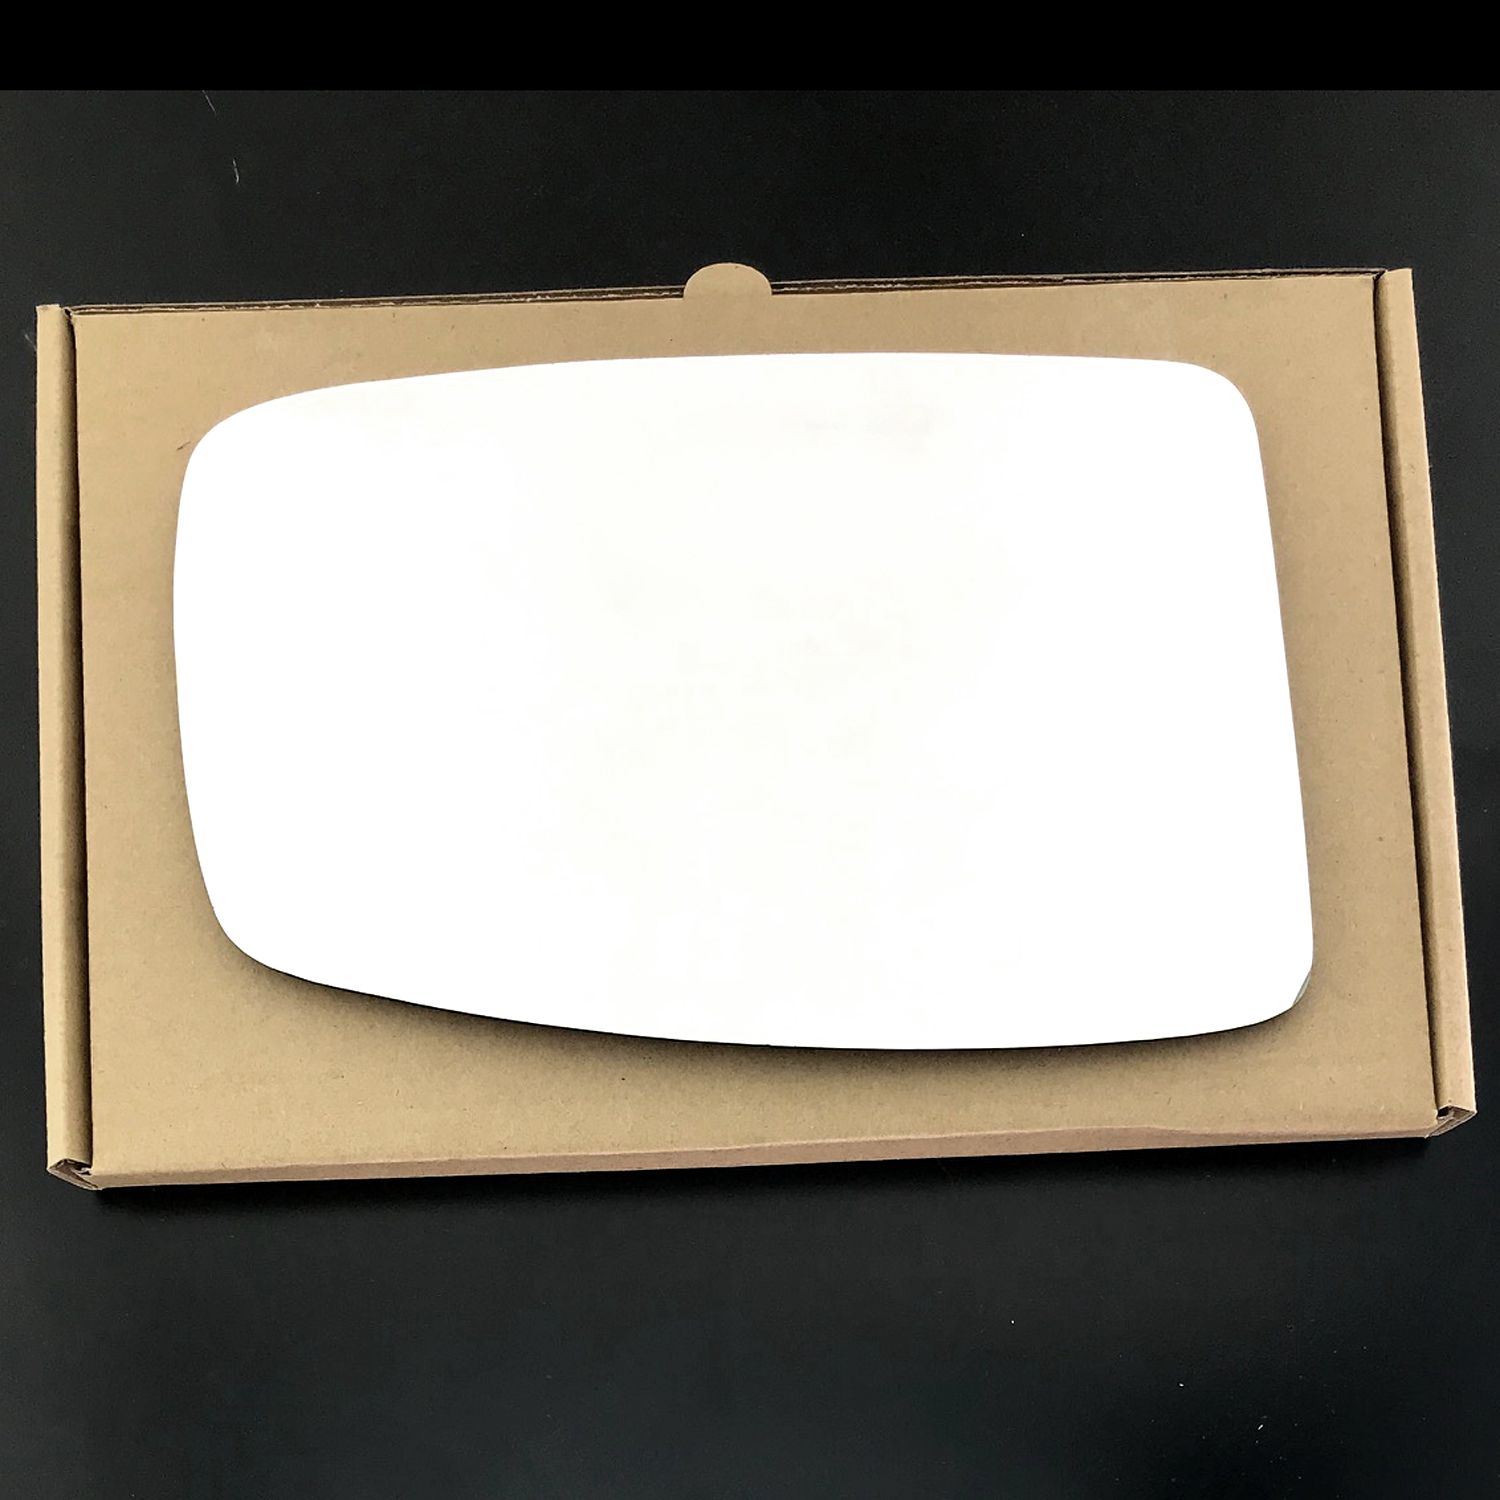 Renault Master Wing Mirror Glass LEFT HAND ( UK Passenger Side ) 2011 to 2020 – Convex Wing Mirror